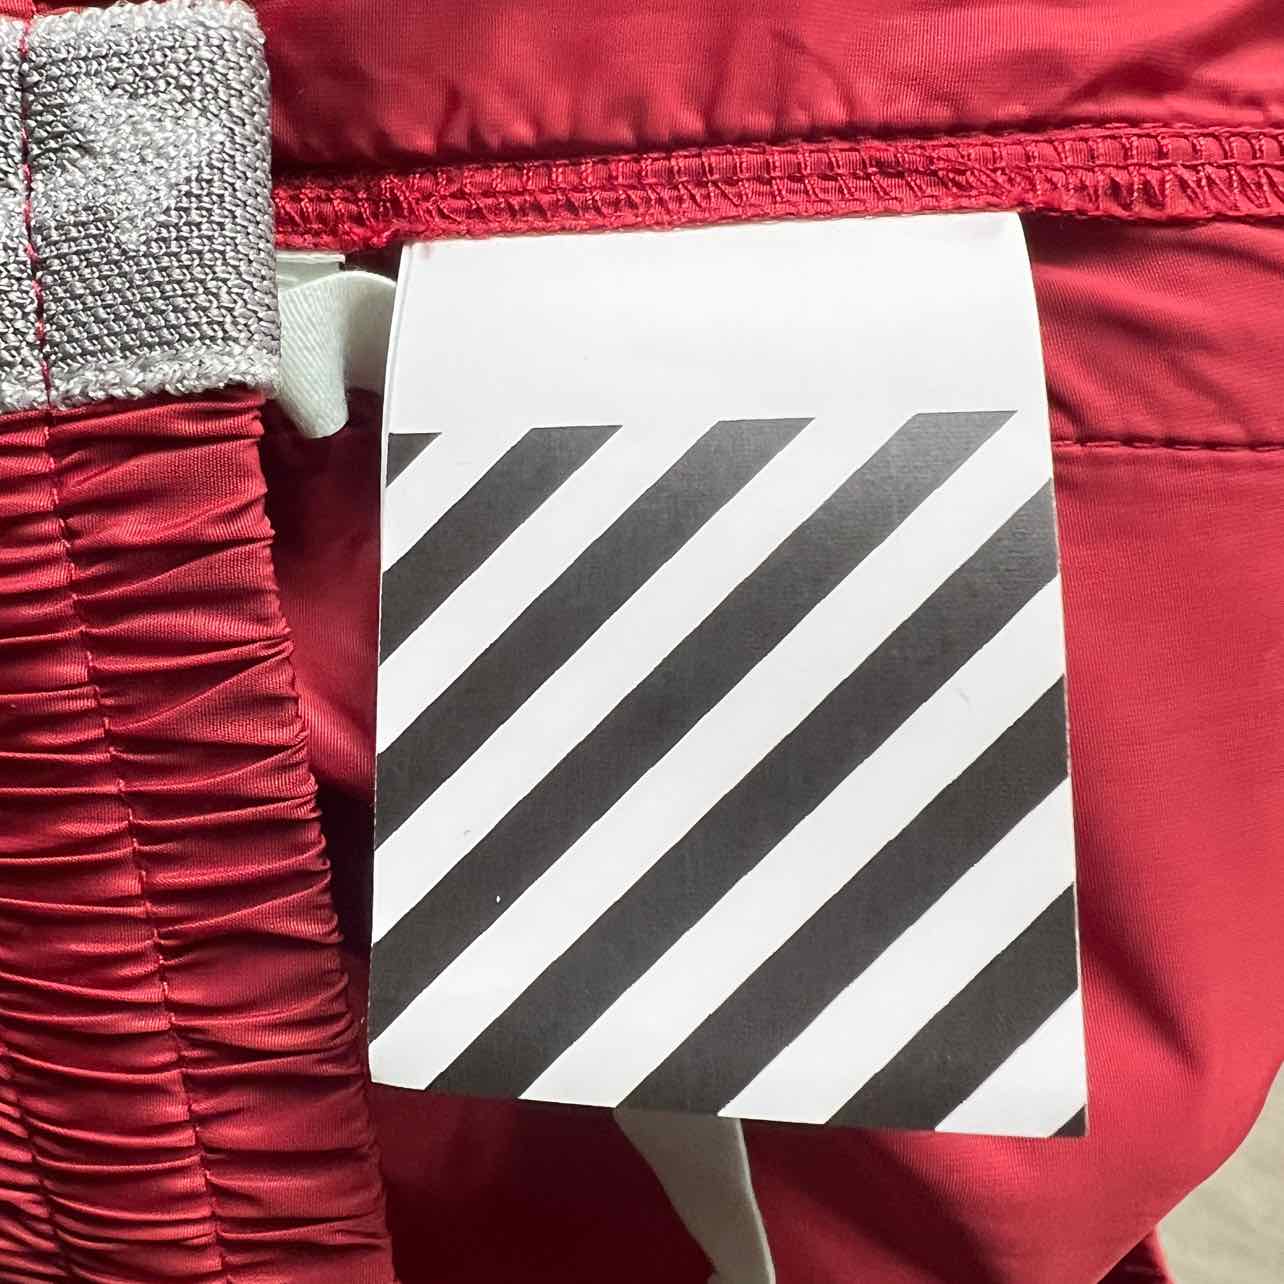 OFF-WHITE Track Pants &quot;CARRYOVER&quot; Red Used Size XL